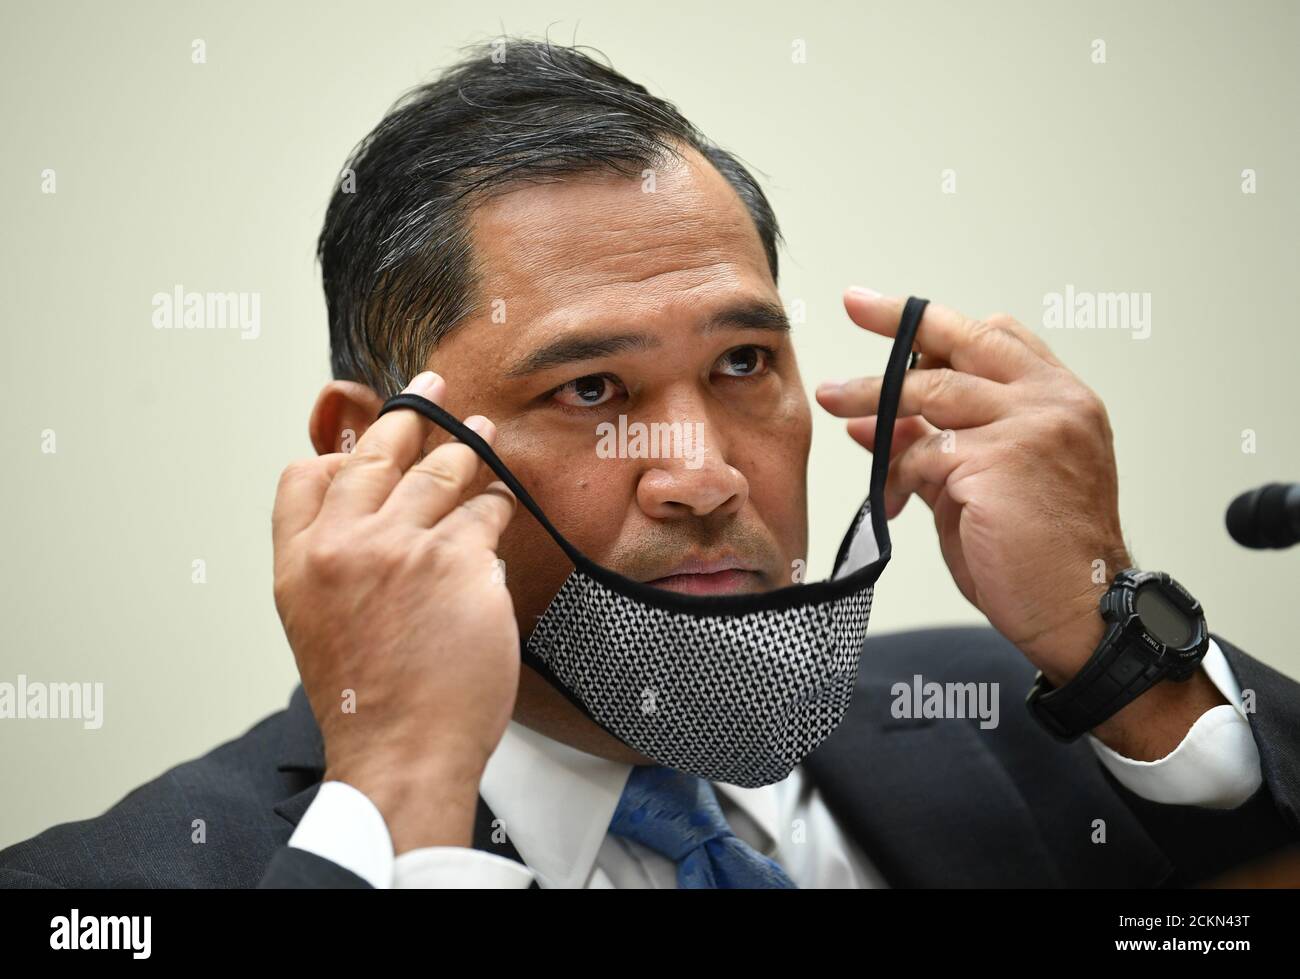 Brian Bulatao, Under Secretary of State for Management, adjusts his face mask as he testifies before a House Committee on Foreign Affairs hearing looking into the firing of State Department Inspector General Steven Linick, on Capitol Hill in Washington, DC on Wednesday, September 16, 2020. The foreign affairs committee issued the subpoenas as part of the panel's probe into accusations that Linick was fired while investigating Secretary of State Mike Pompeo's role in a controversial $8 billion weapons sale to Saudi Arabia. Photo by Kevin Dietsch/UPI Stock Photo